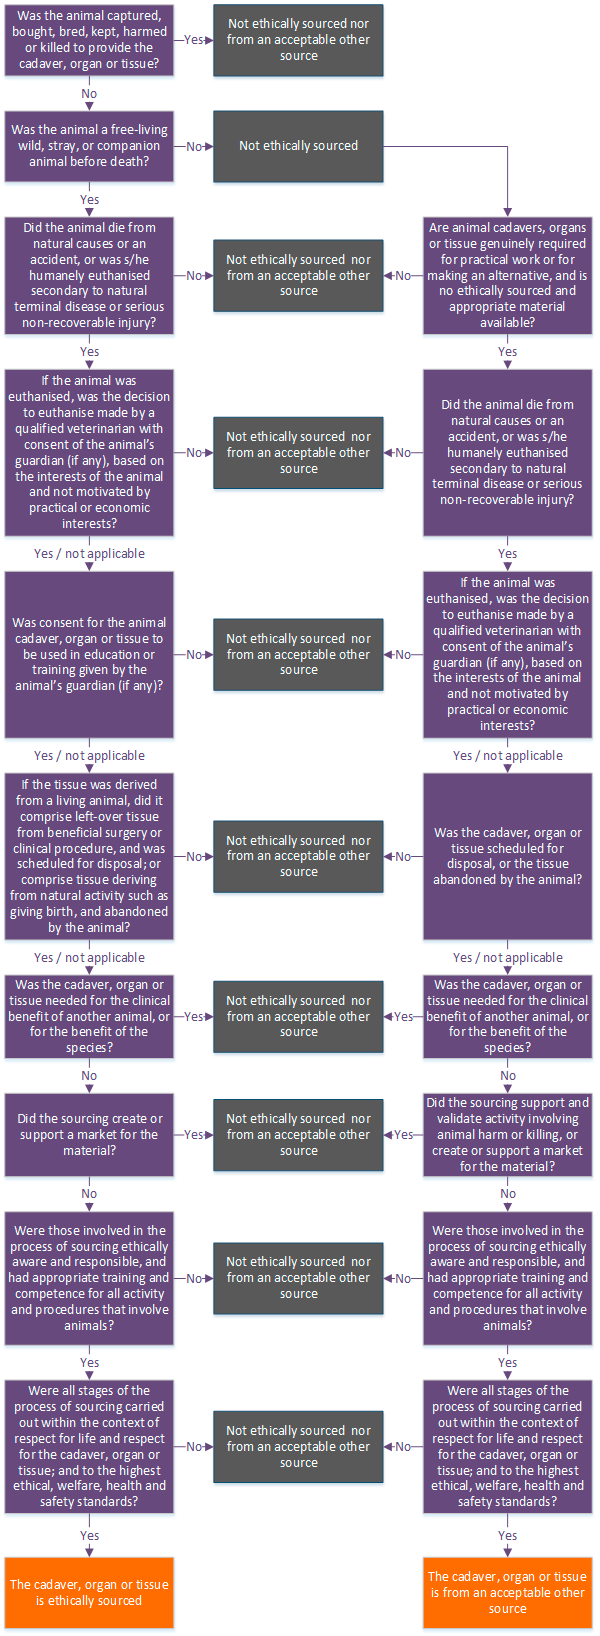 Flowchart to determine the source of an animal cadaver, organ or tissue